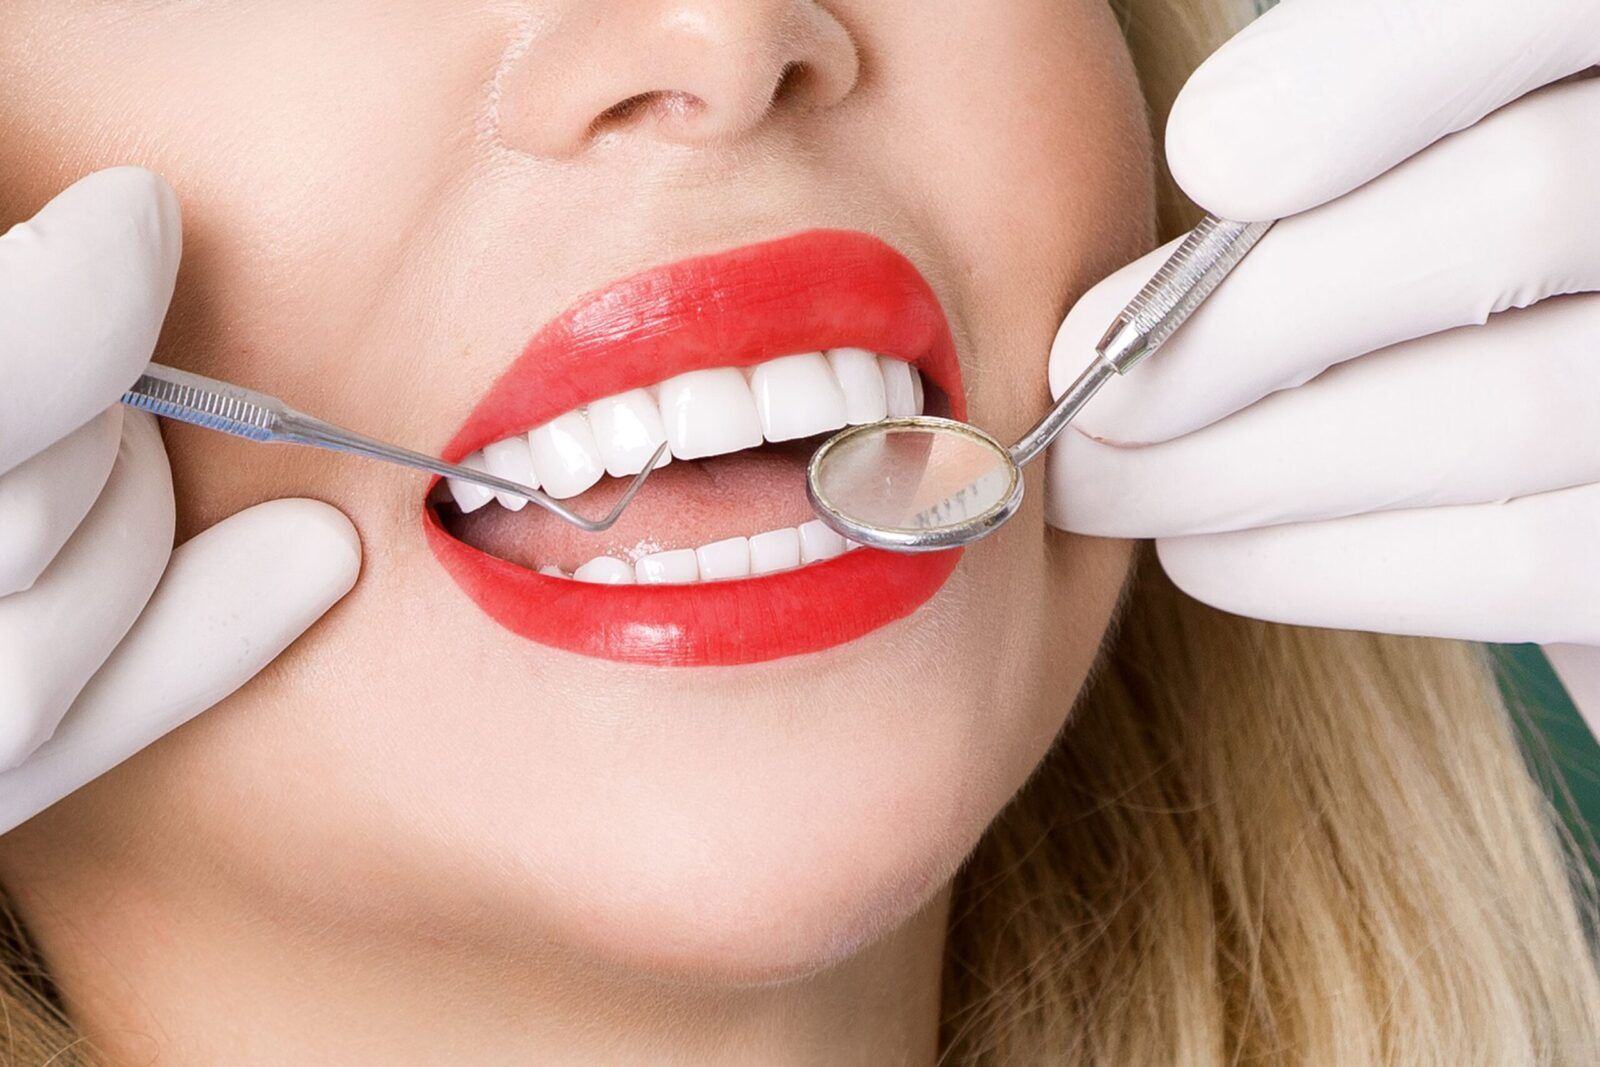 woman with red lipstick having dental exam